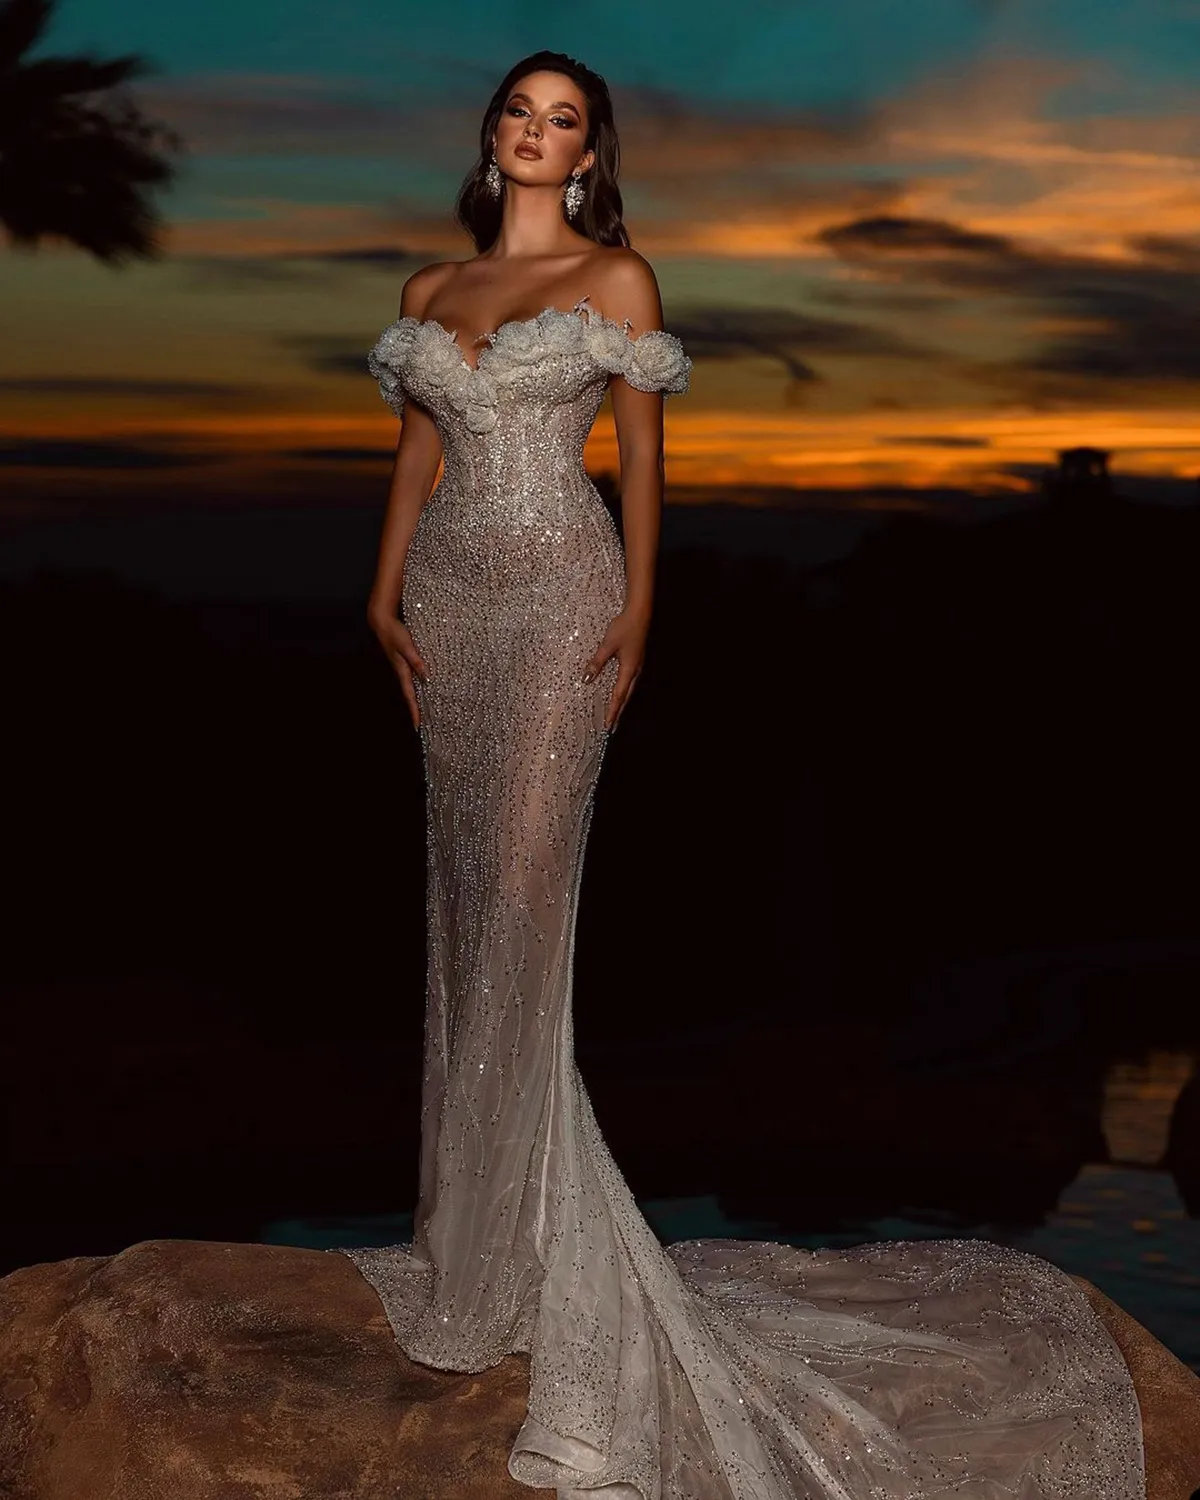 Glamorous Prom Dresses Mermaid Sweetheart Off the Shoulder Whole Body Beaded Backless Sequins Chapel Gown Custom Made Evening Dress Plus Size Robes